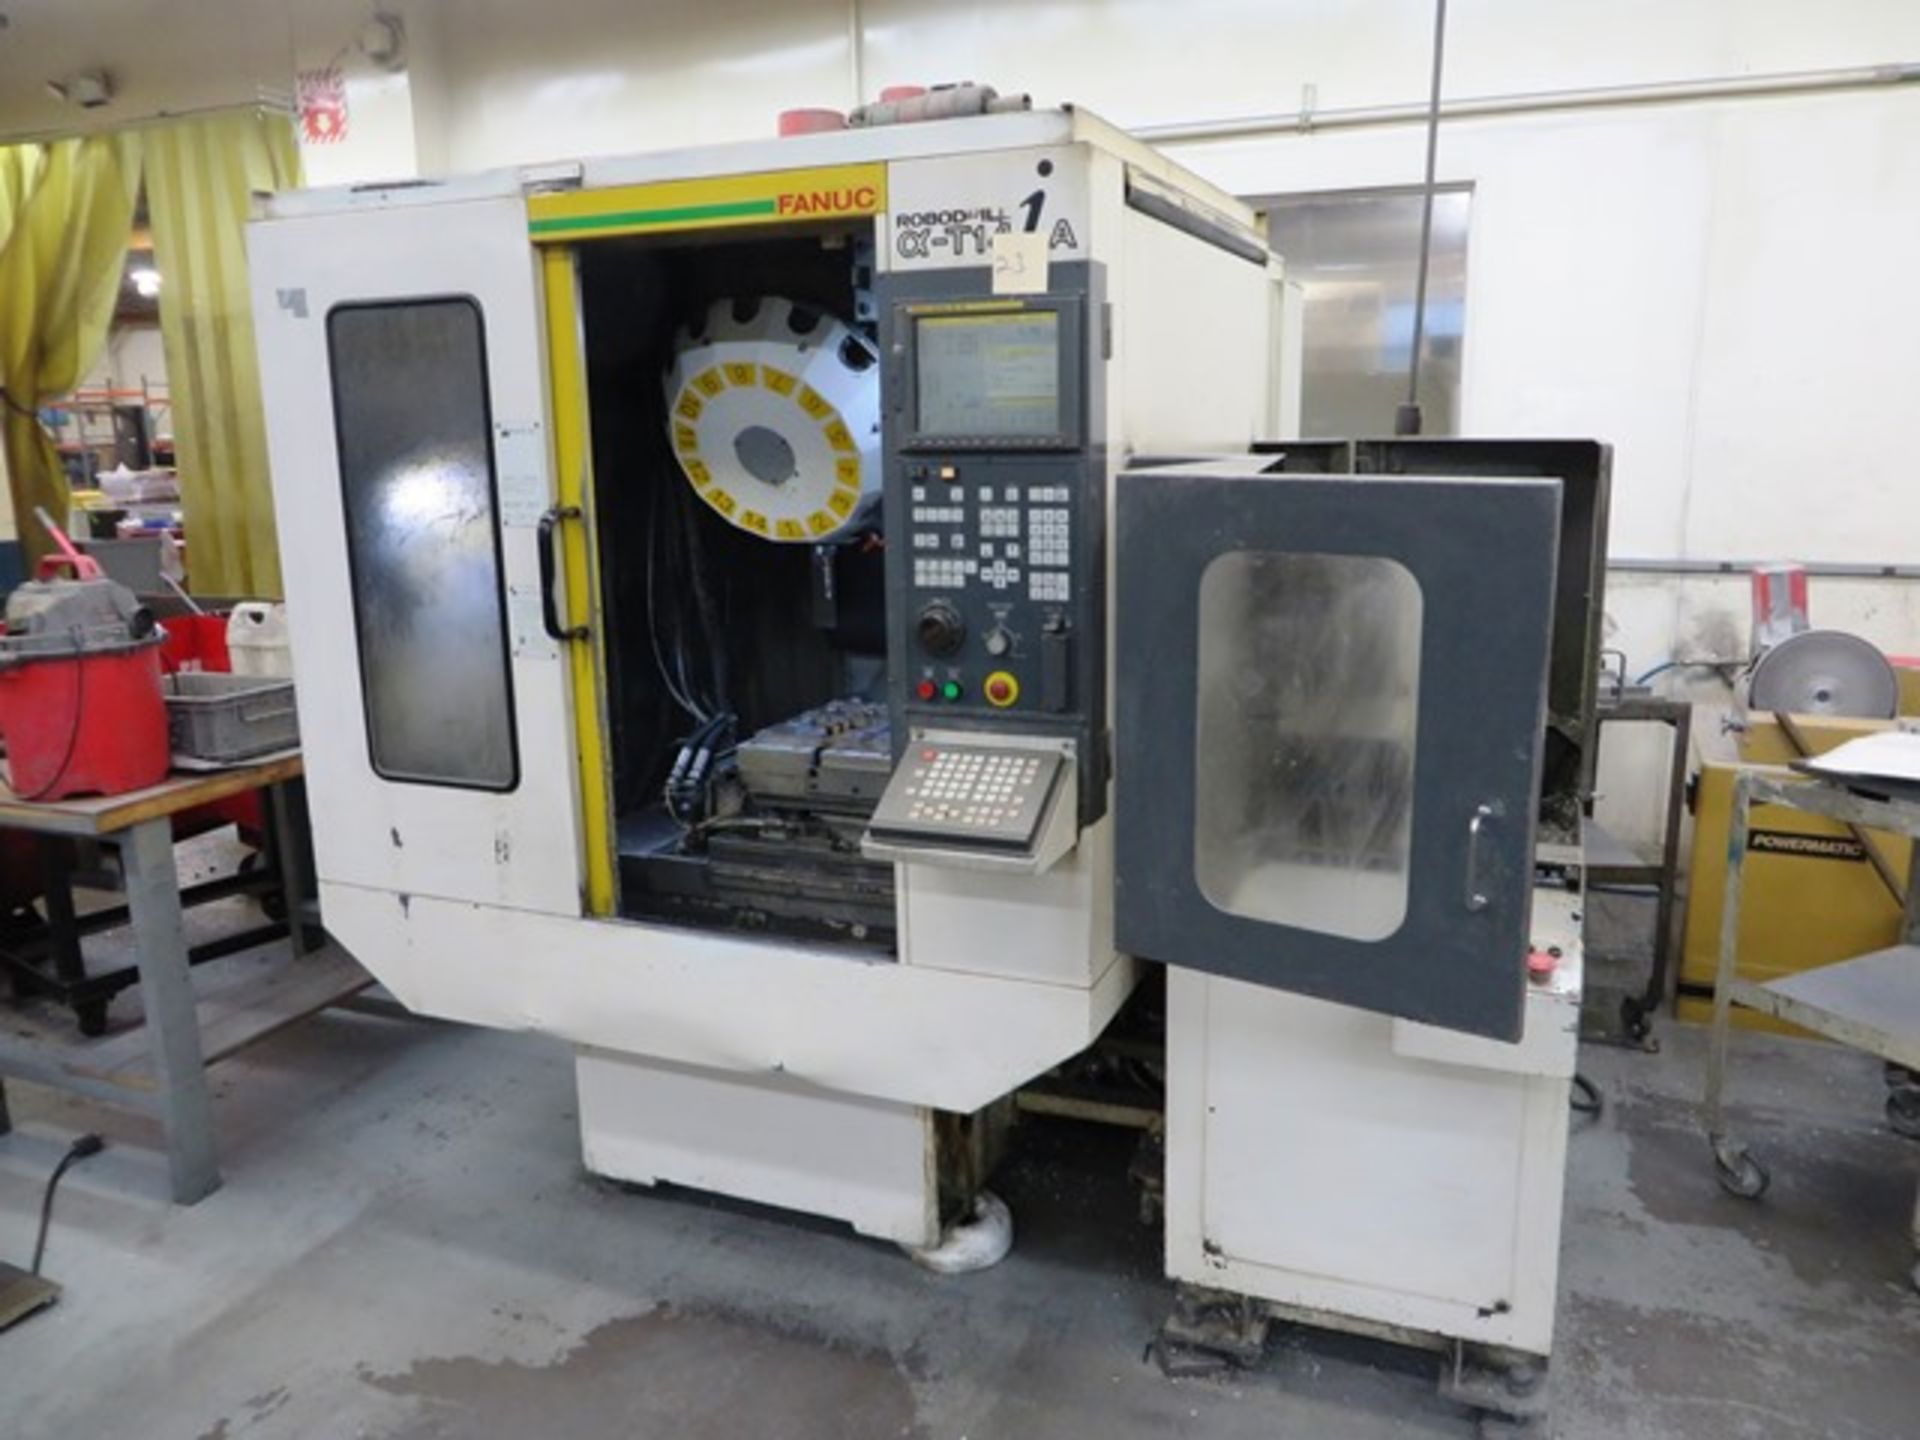 Fanuc Robodrill a-T14iA Dual Pallet CNC Mill, Drill & Tapping Center - Image 3 of 7